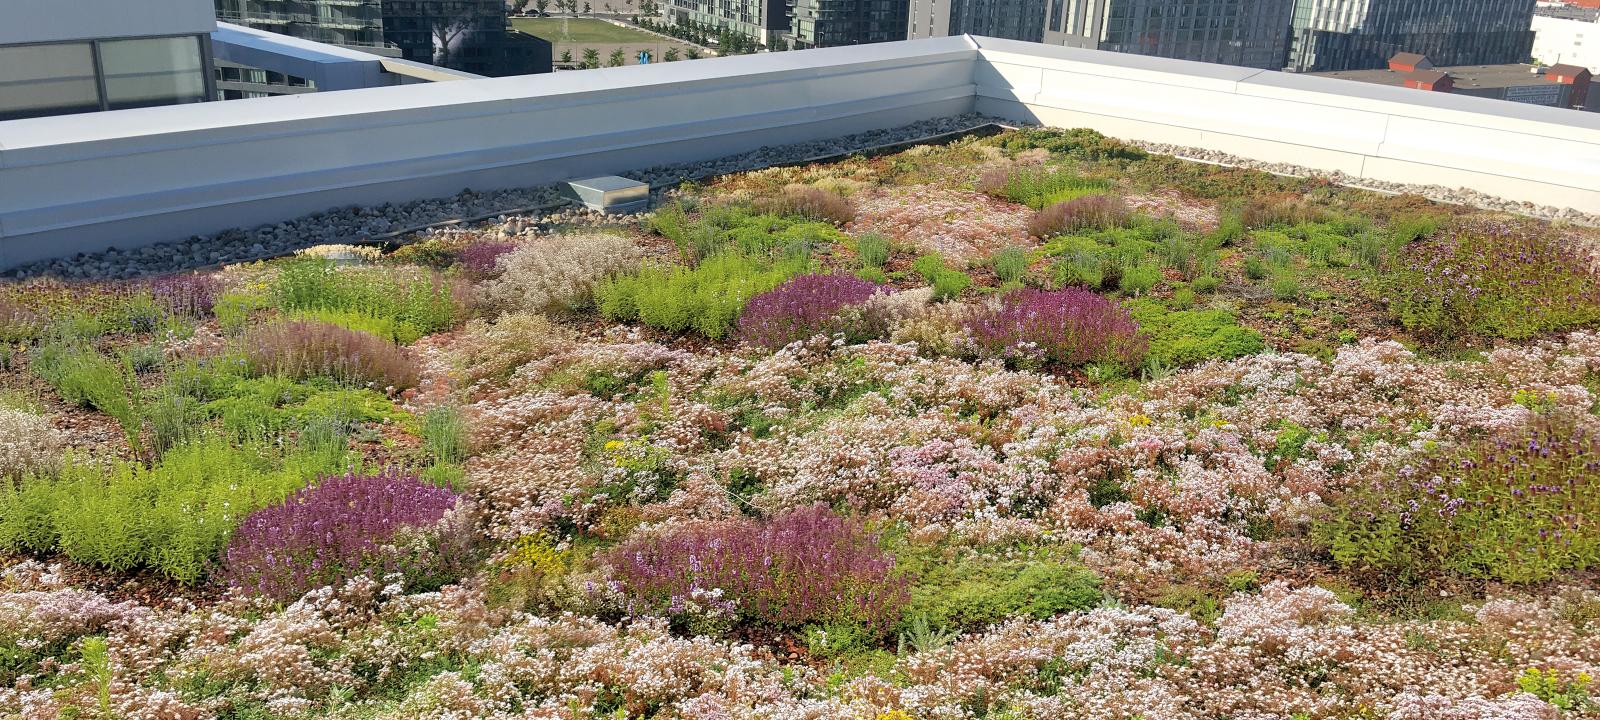 Green roof in the city